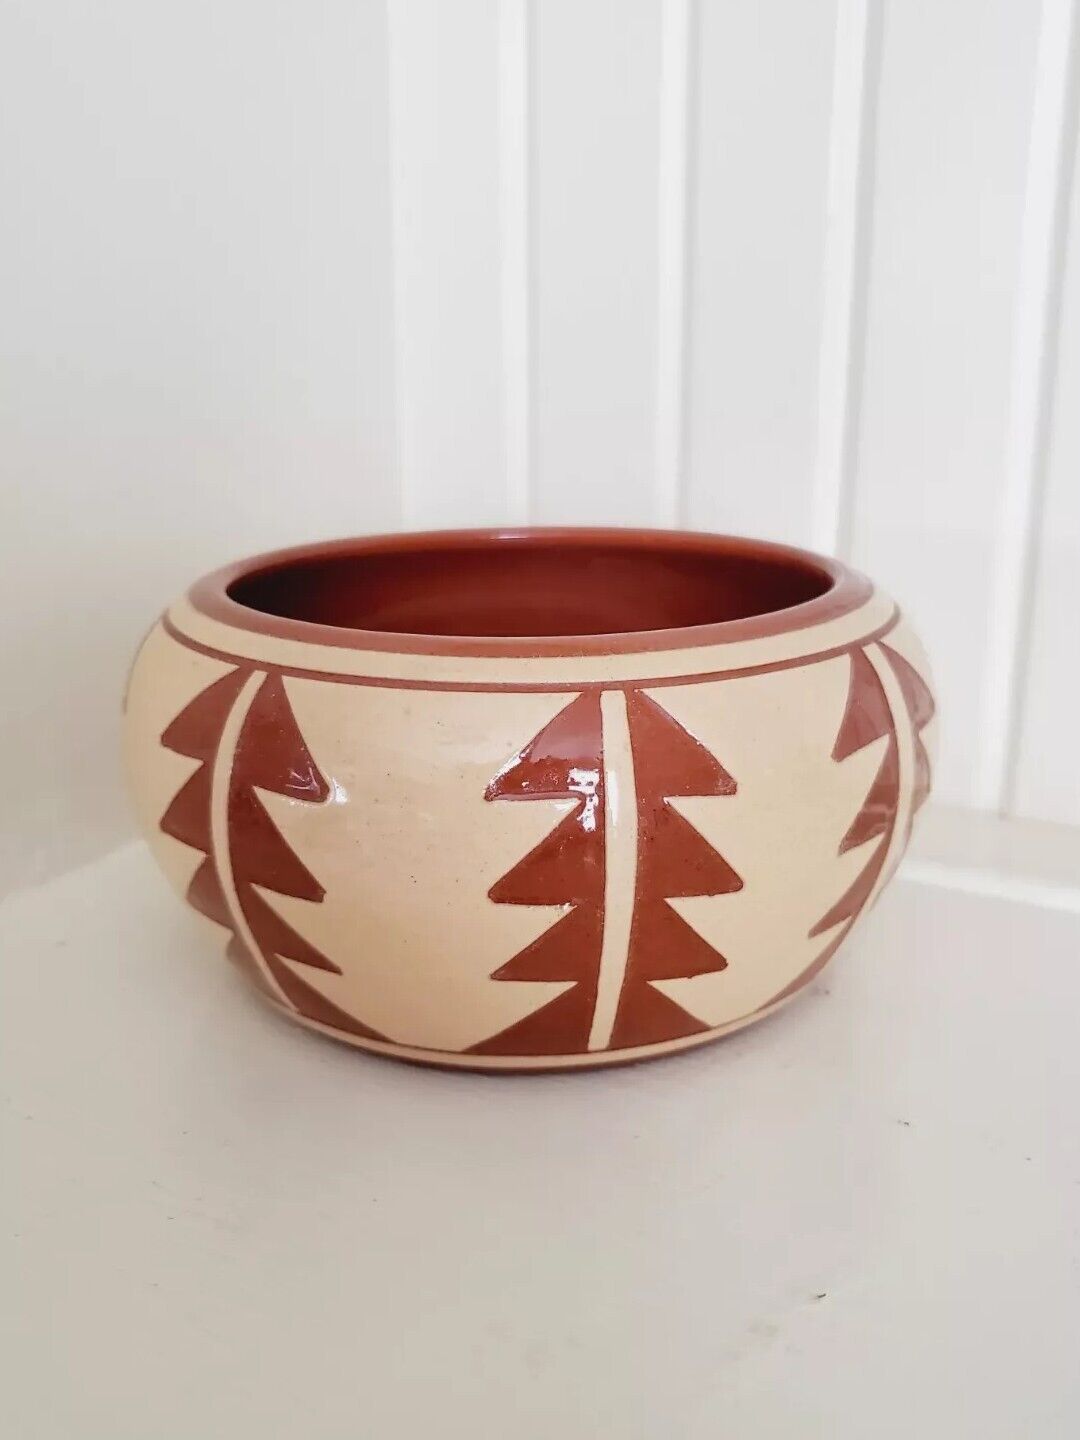 Vintage Pine Ridge Sioux Pottery Small Bowl Signed 1950s Trees Geometric